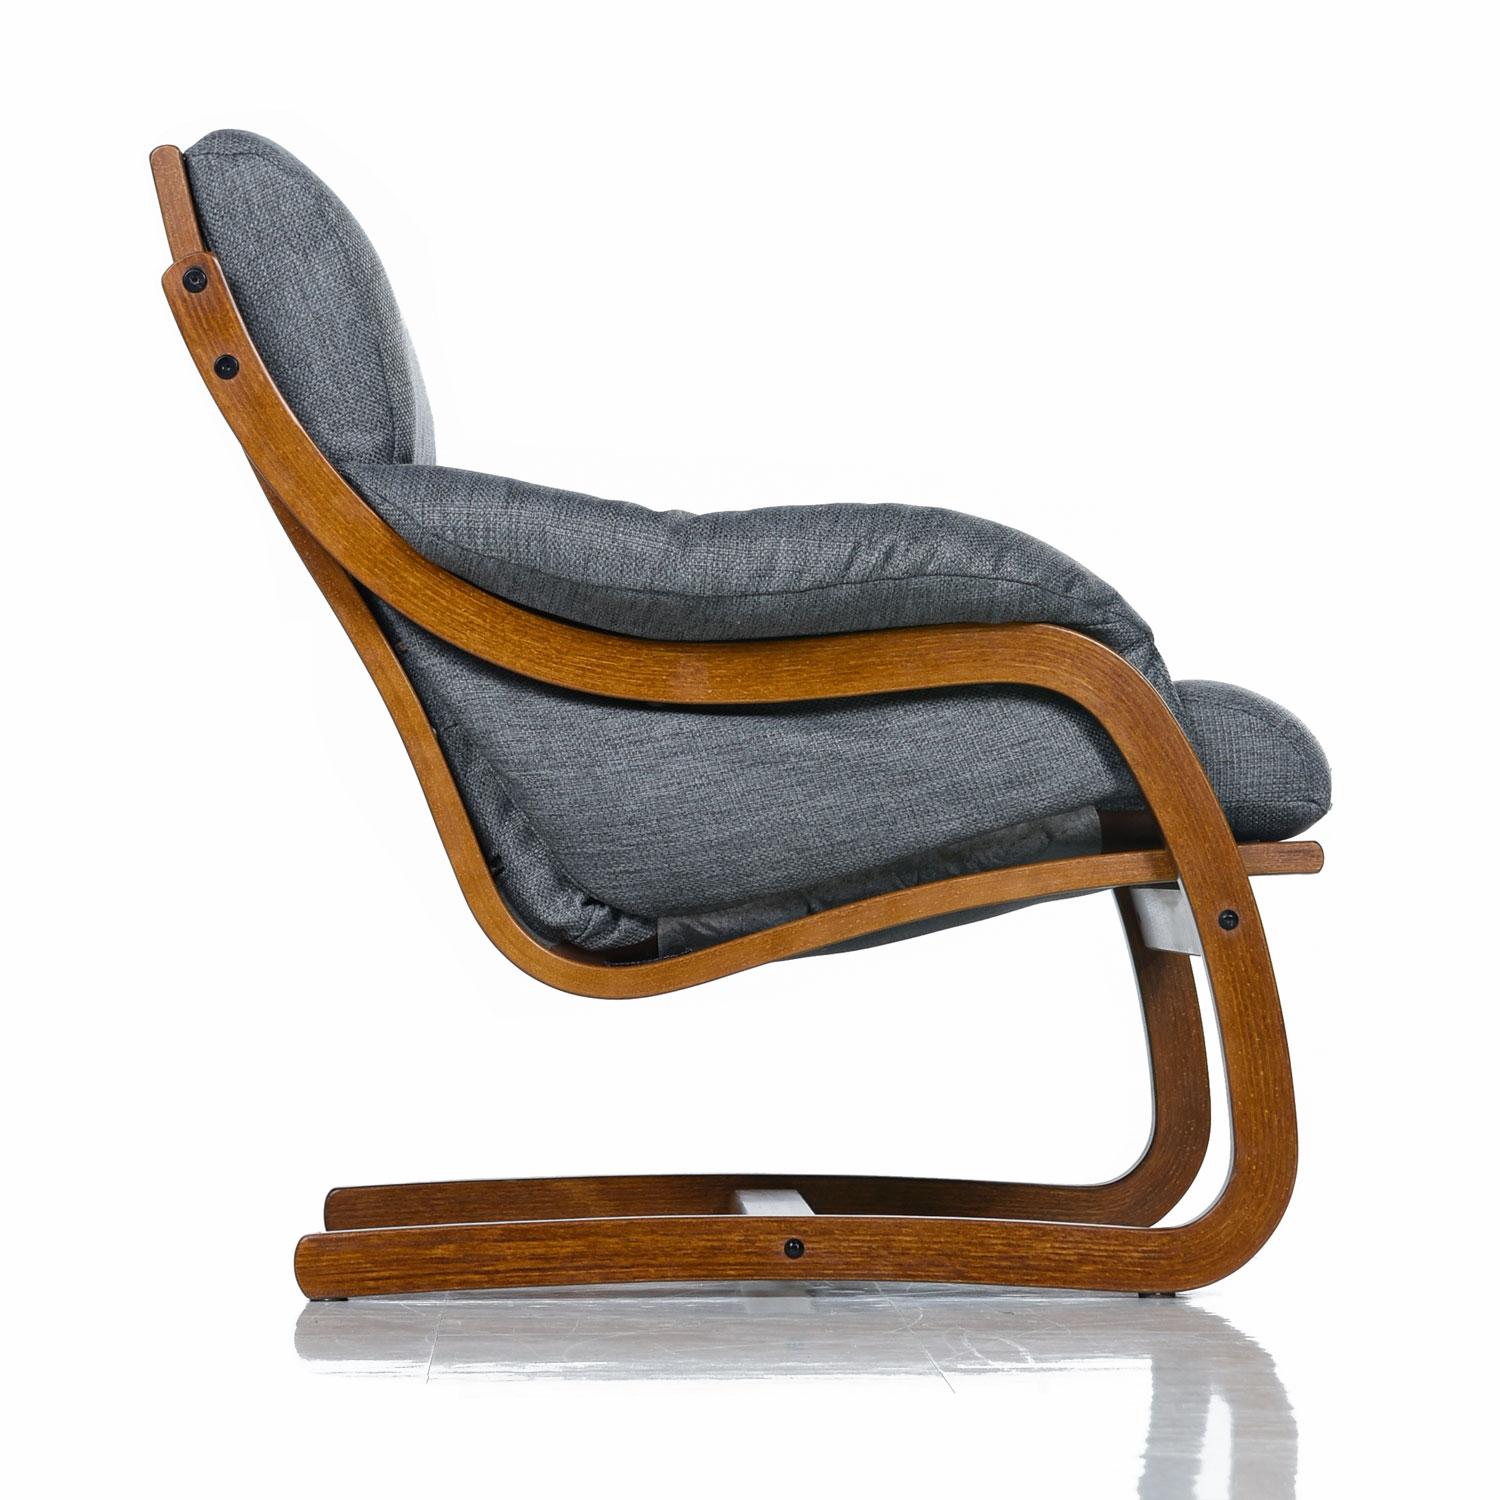 Fully restored, super comfortable Danish modern lounge chairs by Stouby Polster. Still doing business after over 100 years, Stouby quality rings true in the design of these chairs. Cantilever frames in the style of Alvar Aalto constructed of bent,